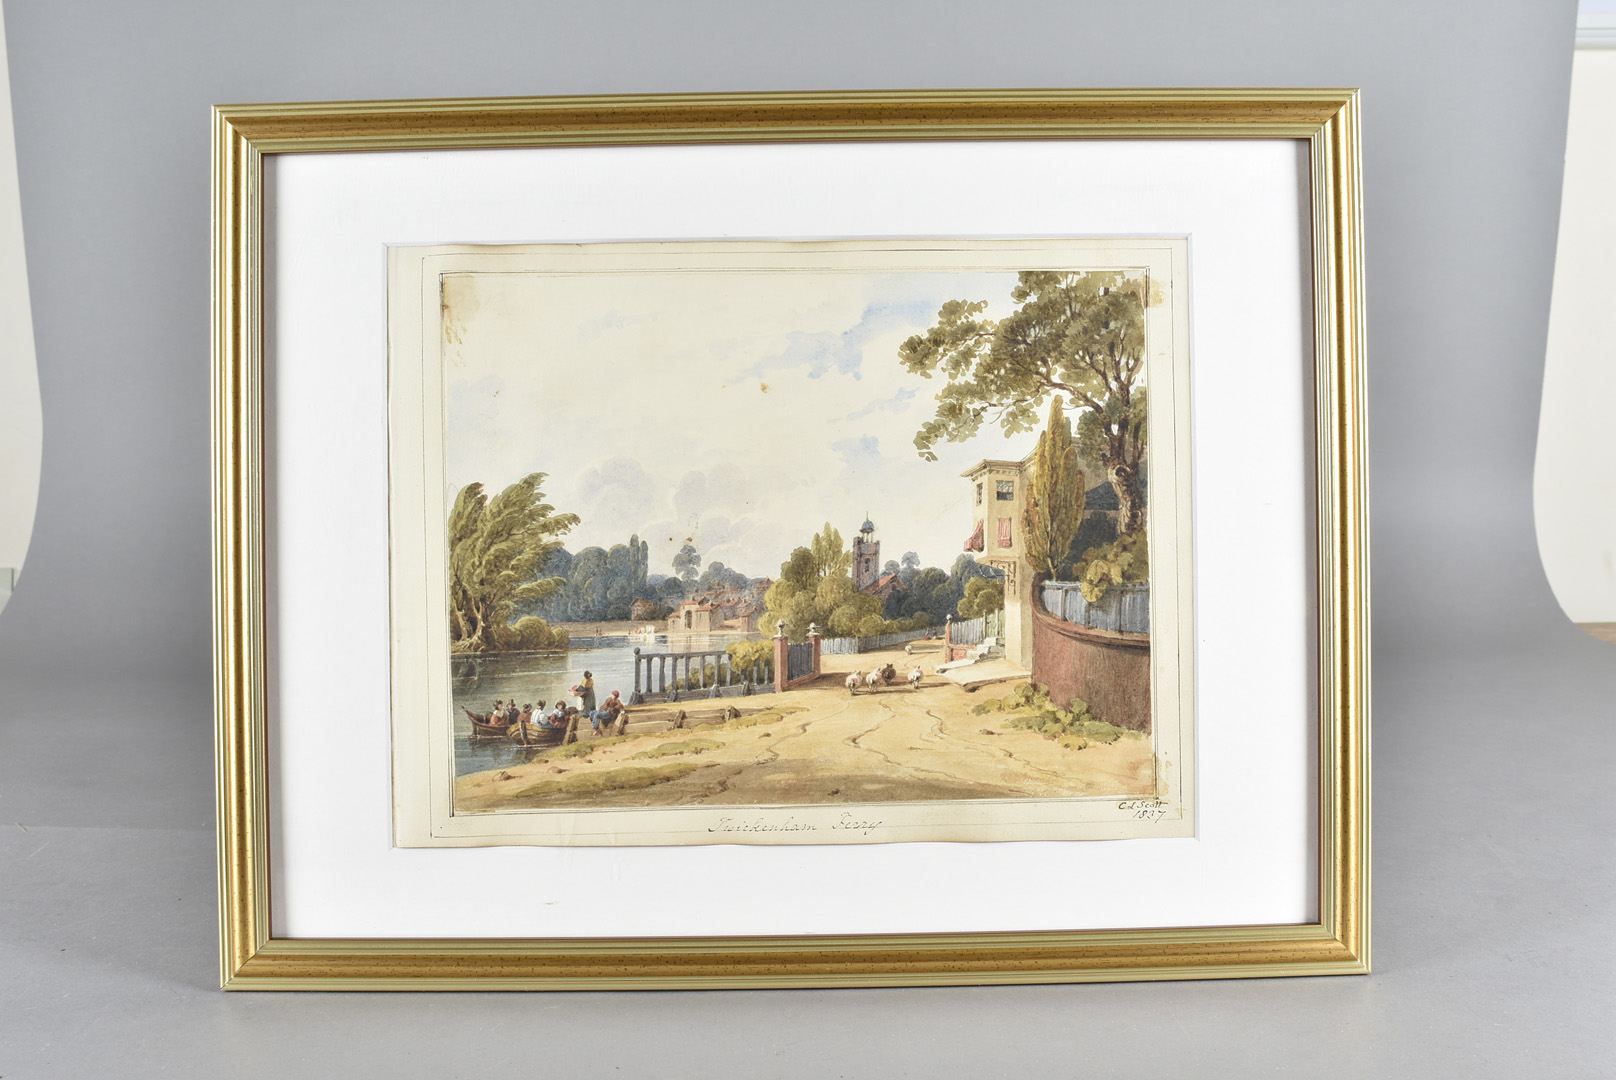 C S Scott, 19th Century, watercolour, Twickenham Ferry, signed to border and dated 1837, framed - Image 2 of 2